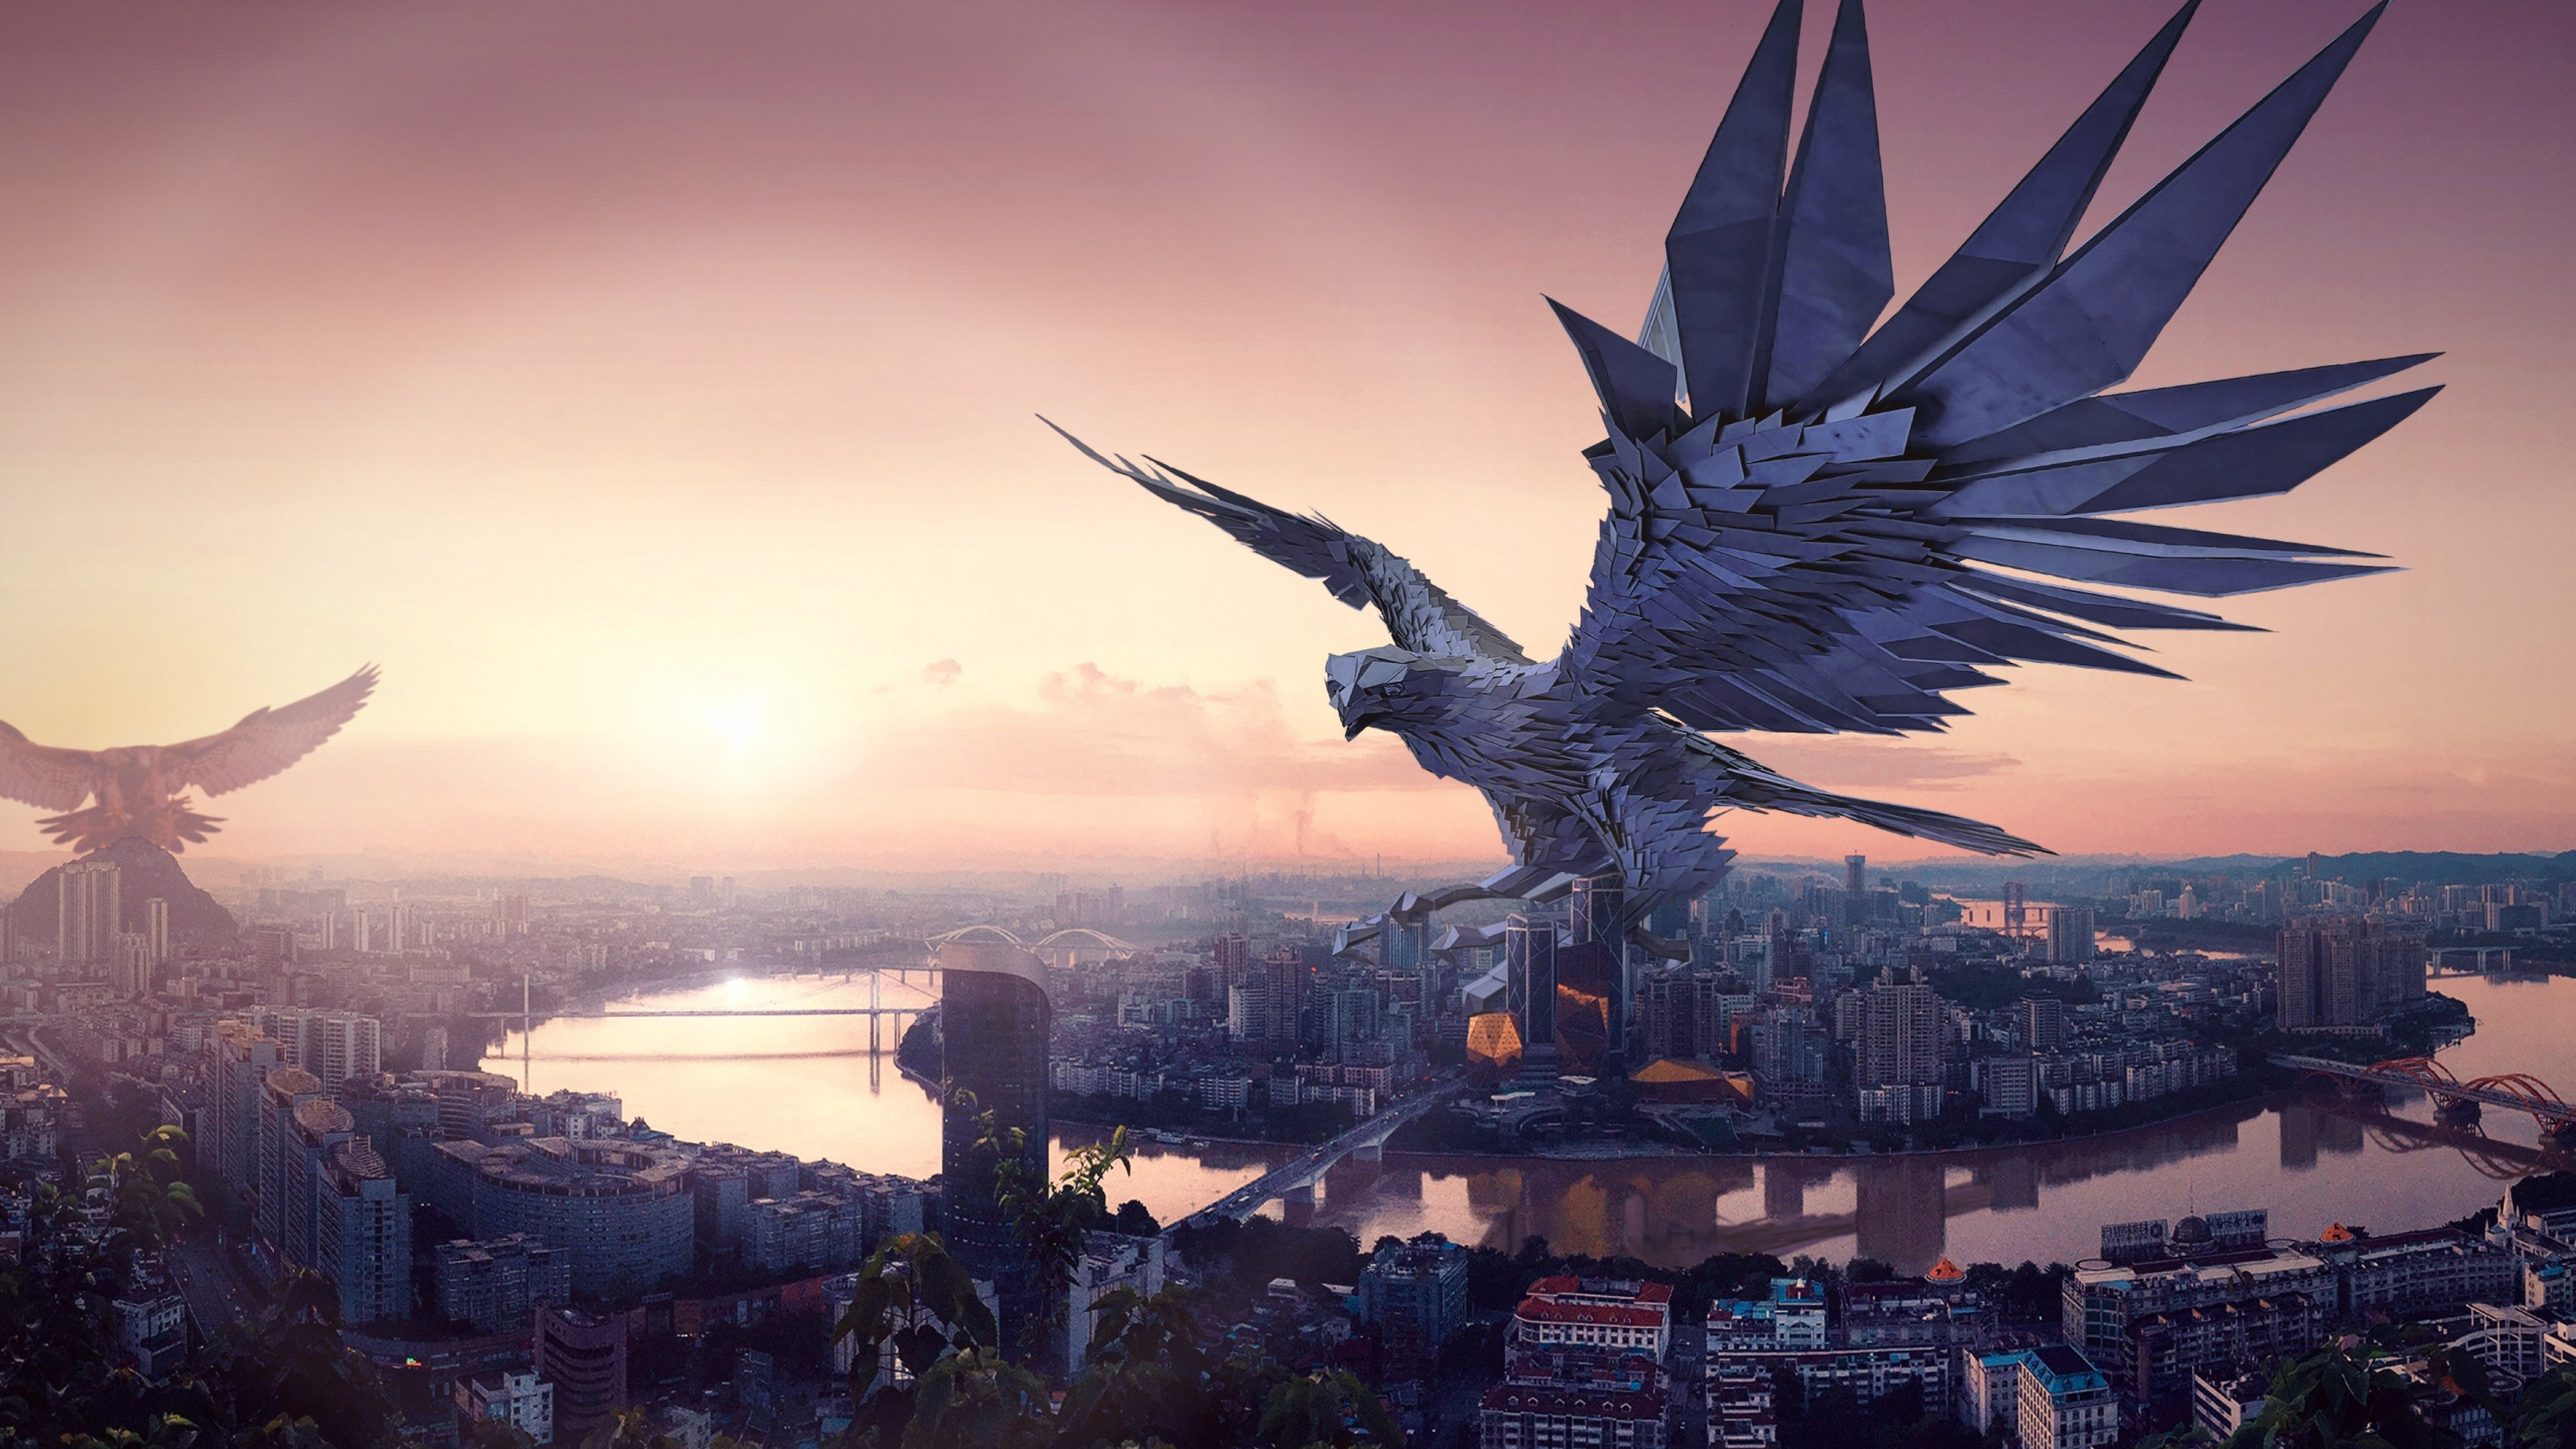 Download Wallpaper The Falcon Protector Of The City x16